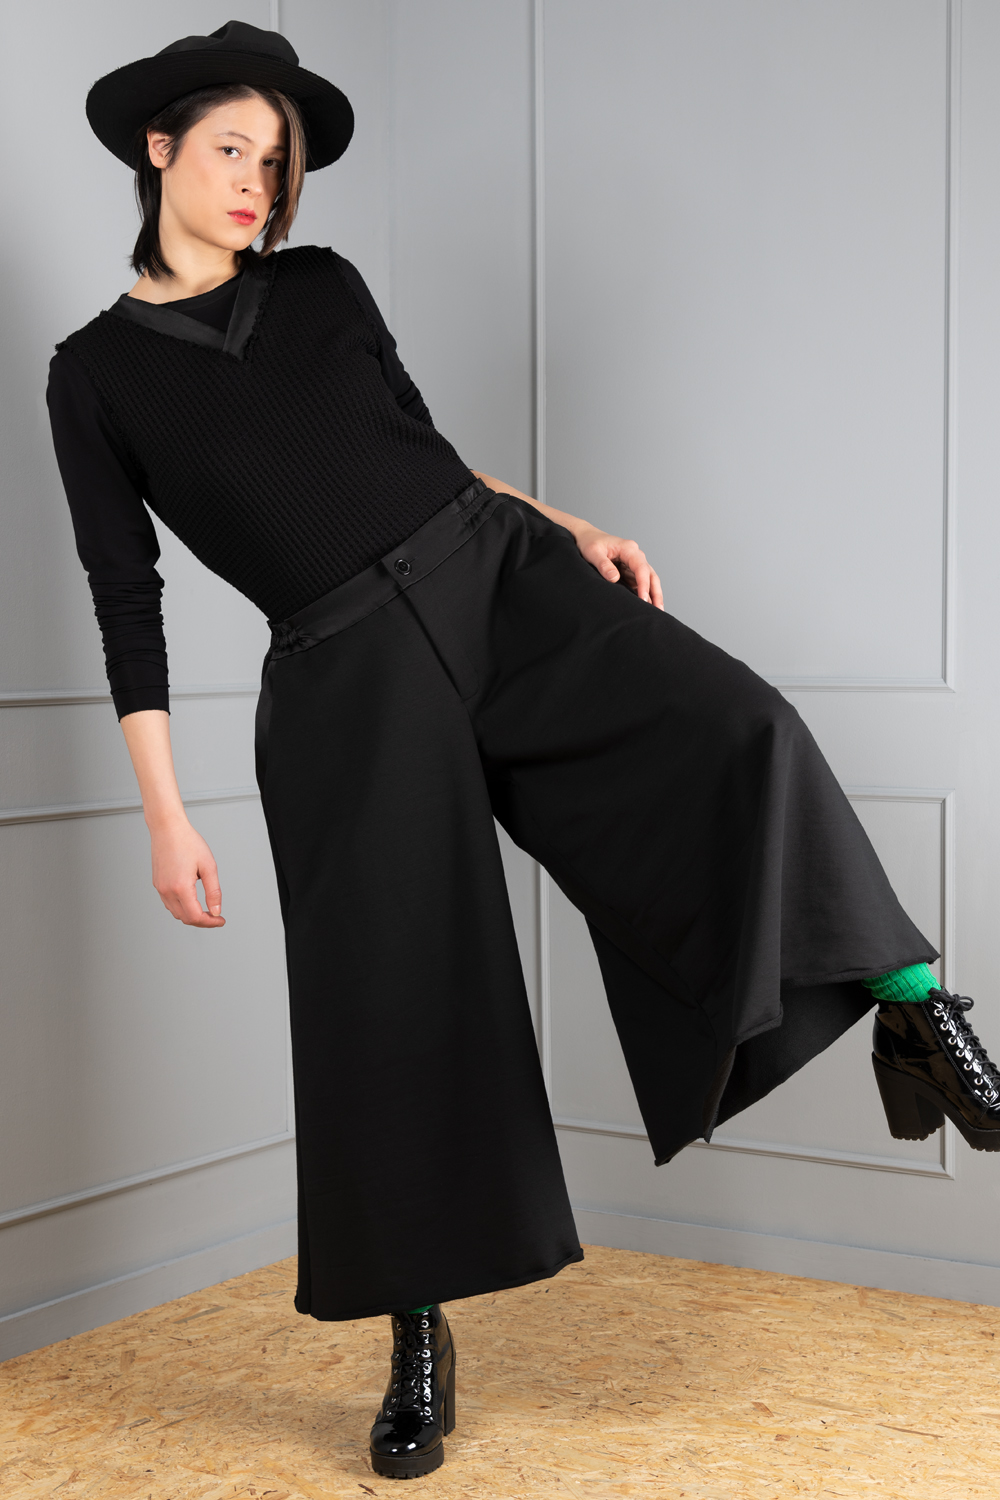 Black unisex skirt trousers for an eccentric look